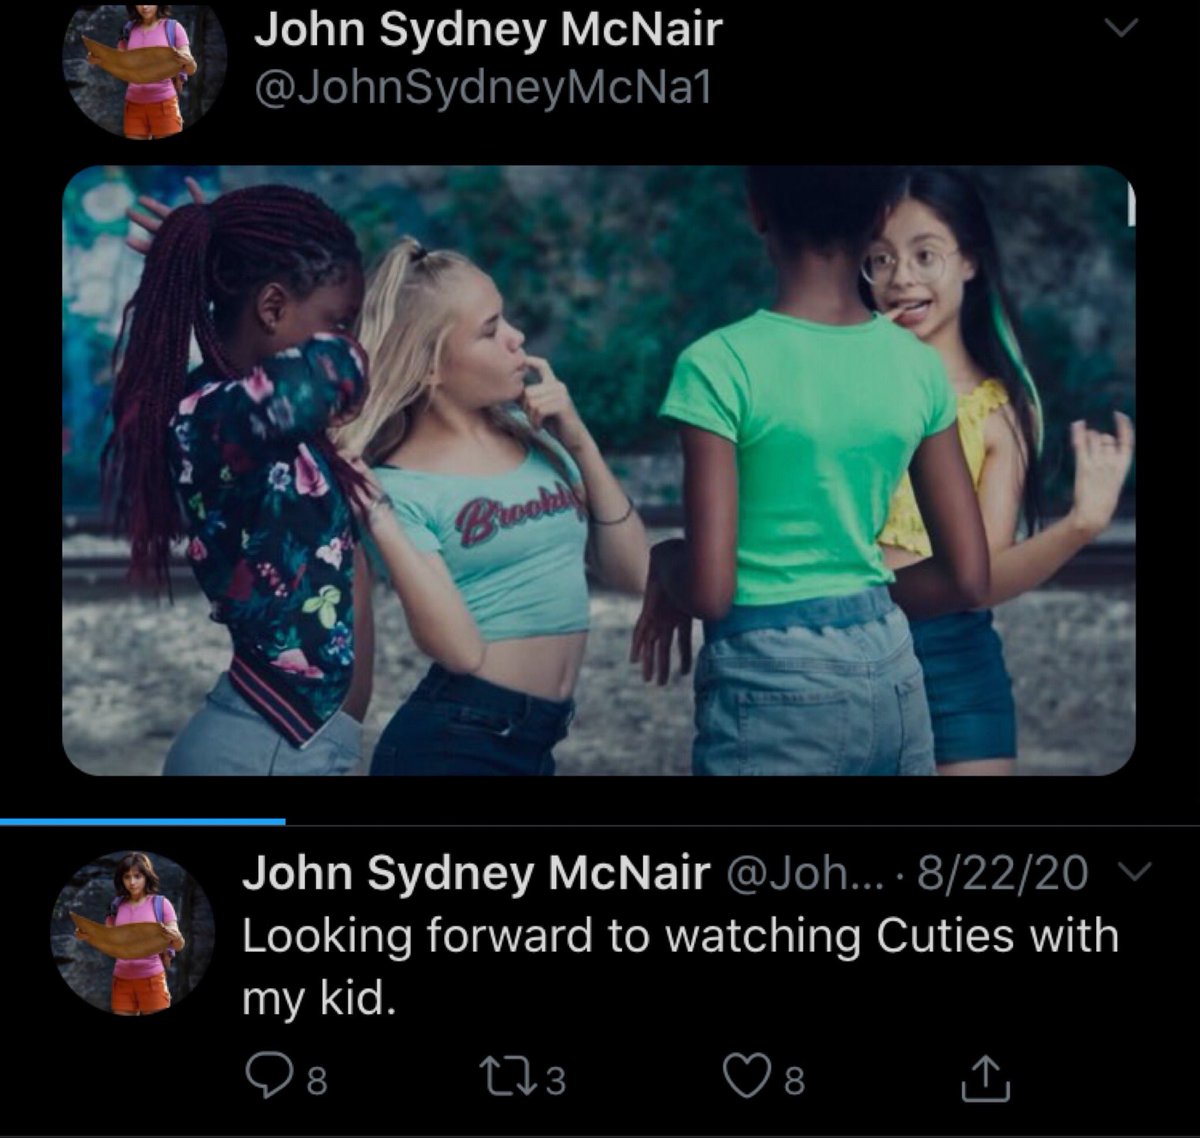 the man is apparently coding his tweets to say gross shit about kidsalso more of his facehe’s also *constantly* talking about “cuties”. how he wants to watch it WITH HIS KID. good wake up call to anyone defending that movie